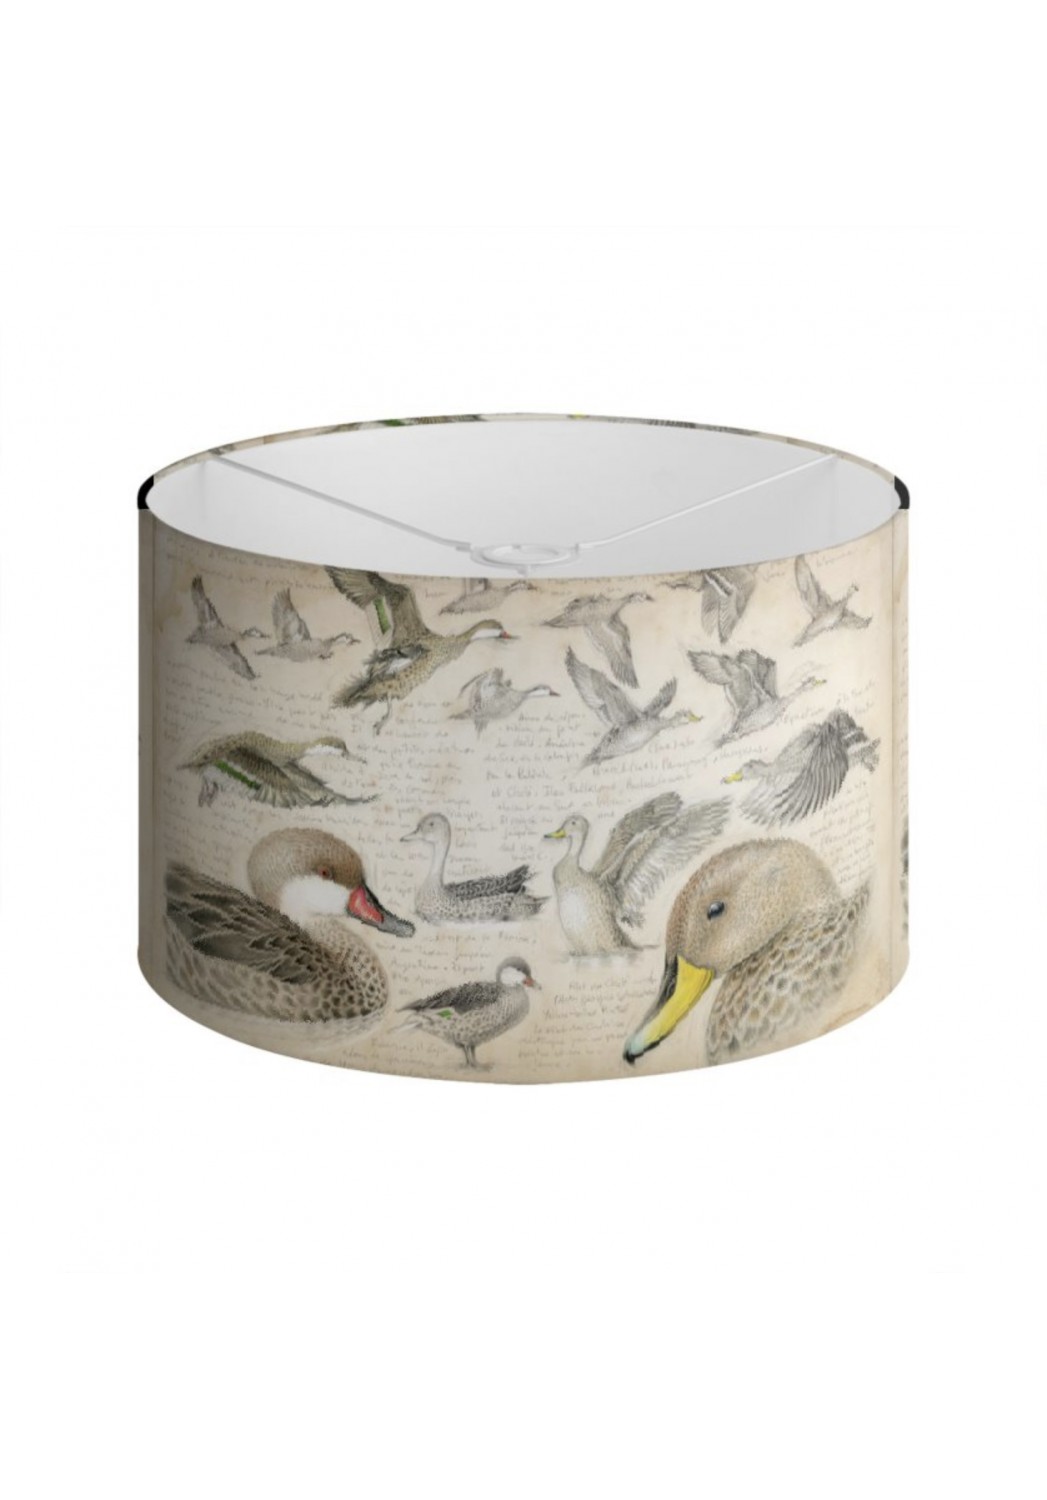 Marcello-art: Decoration accessoiries Lampshade 234 White-cheeked pintail & Yellow-billed Pintail